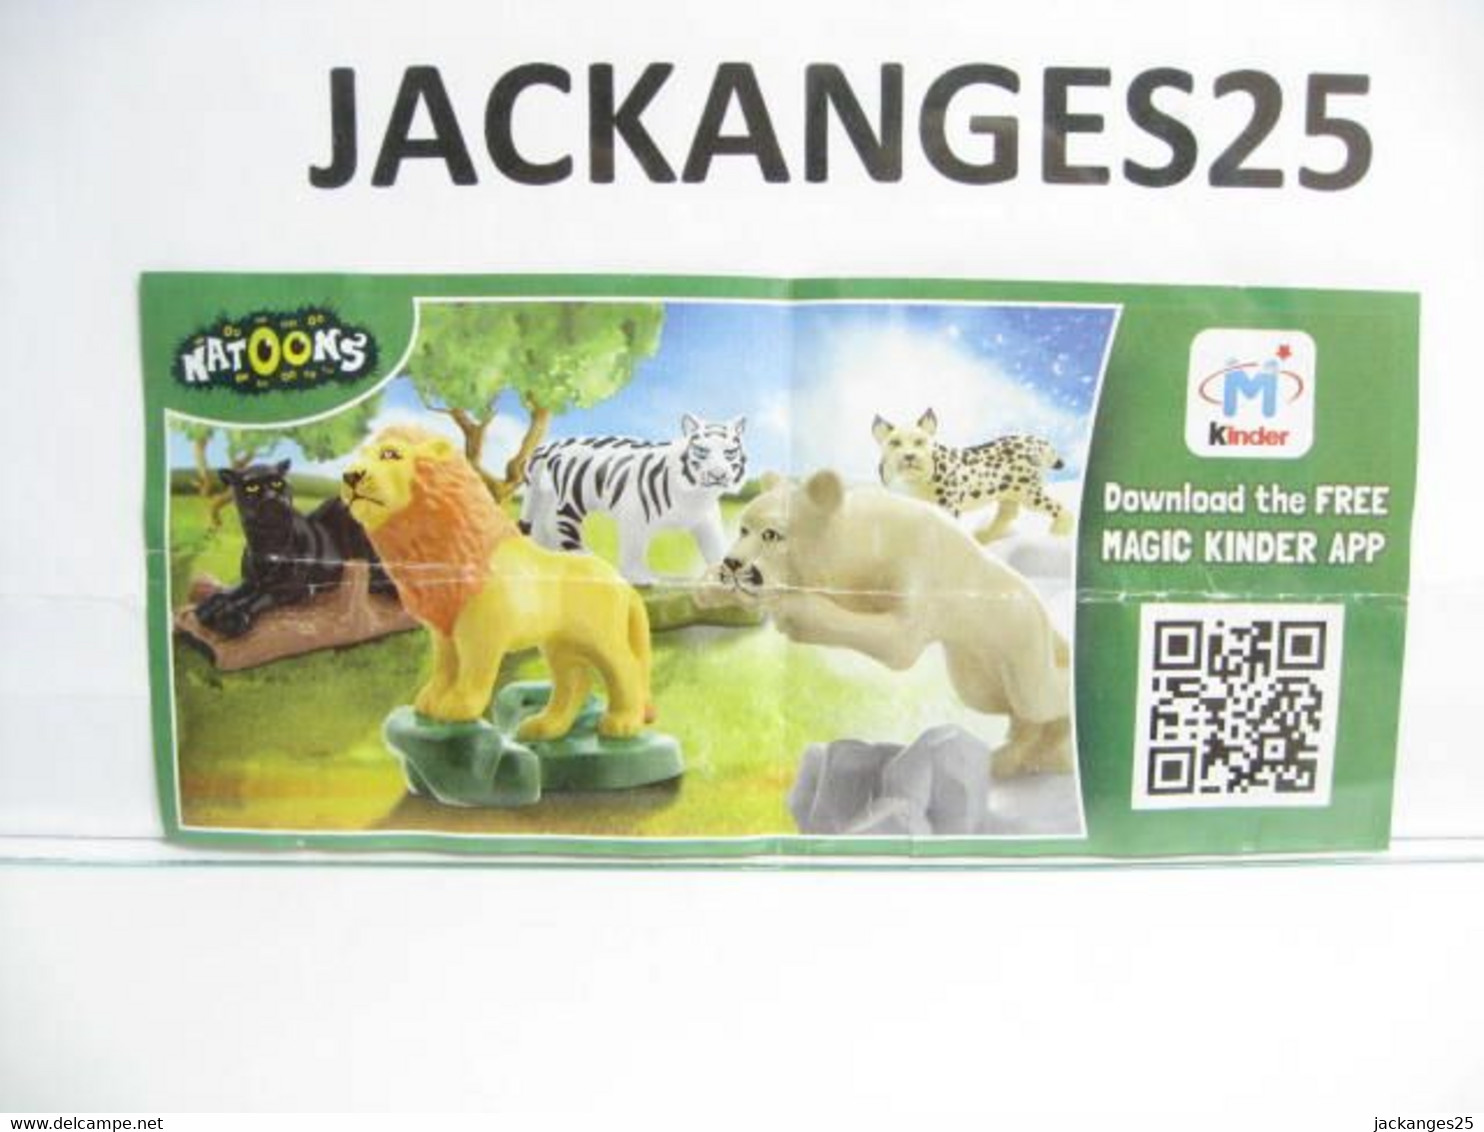 KINDER MPG FS 019 LYNX PLASTIC ANIMAUX NATOONS TIERE 2015 + BPZ - Families